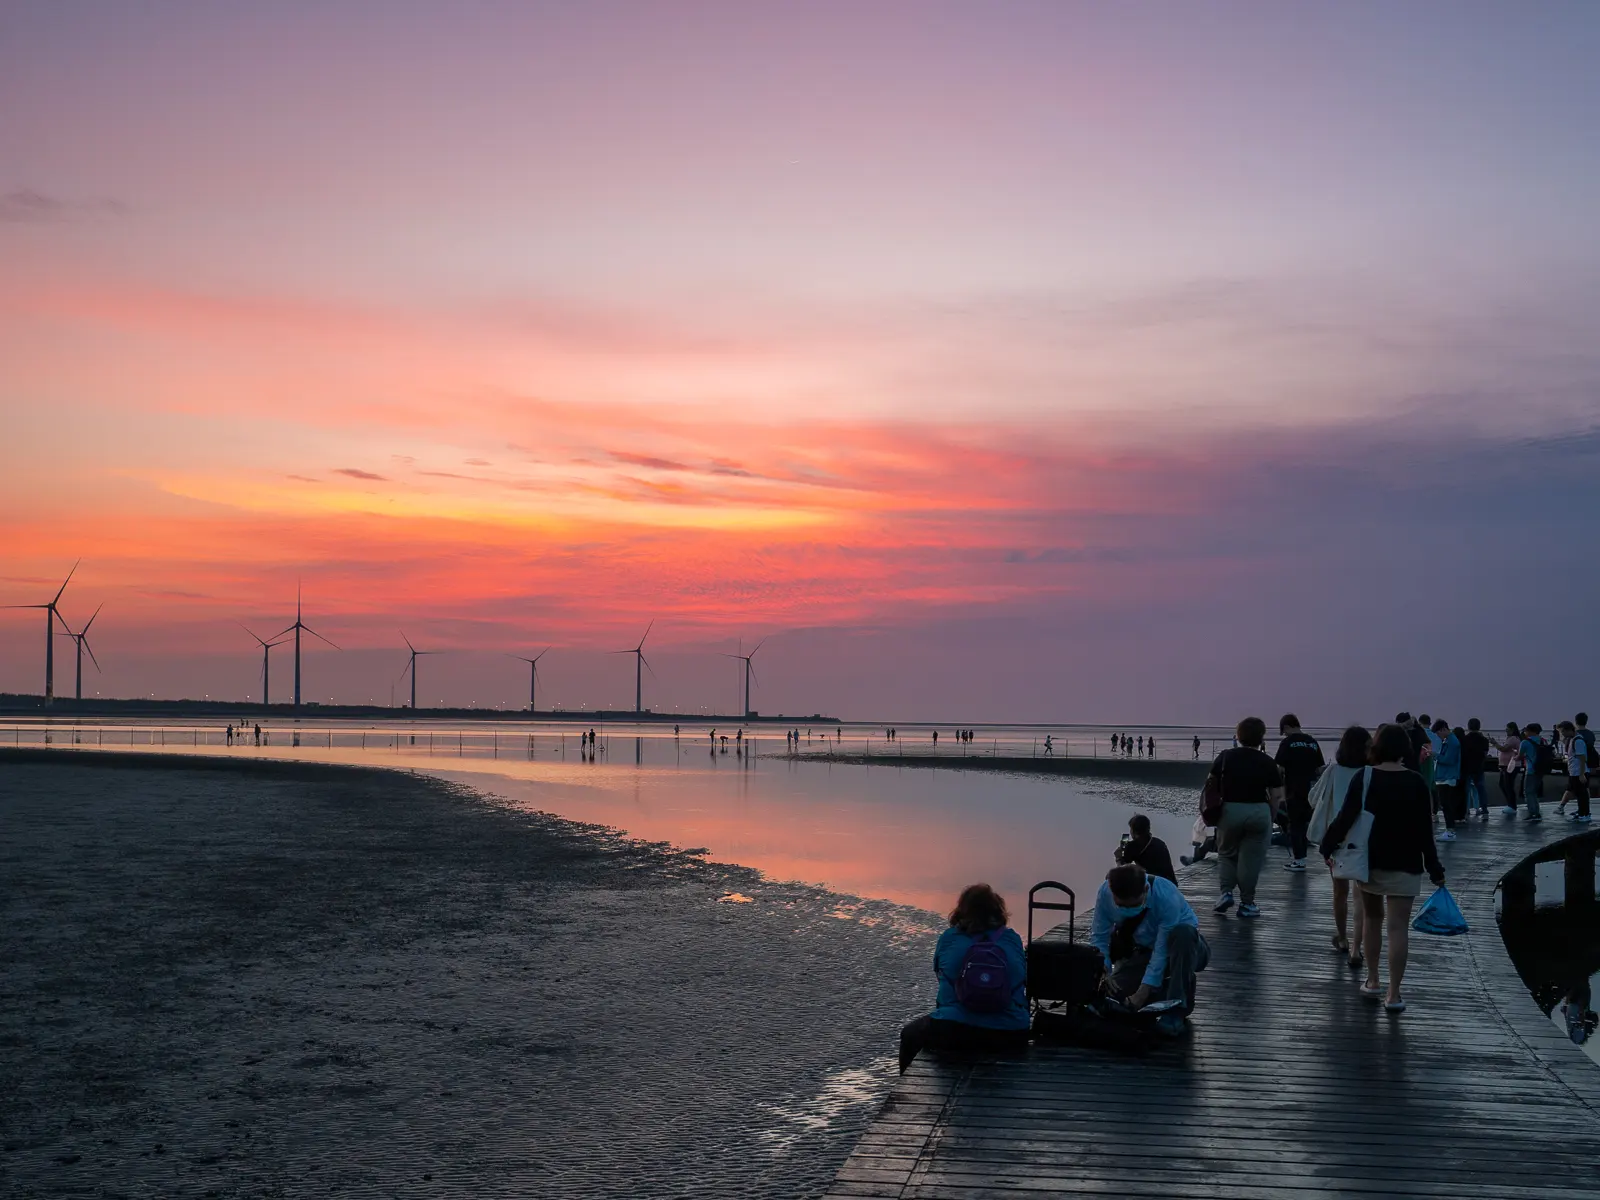 A group of tourists on a boardwalk watches the afterglow of the sunset.